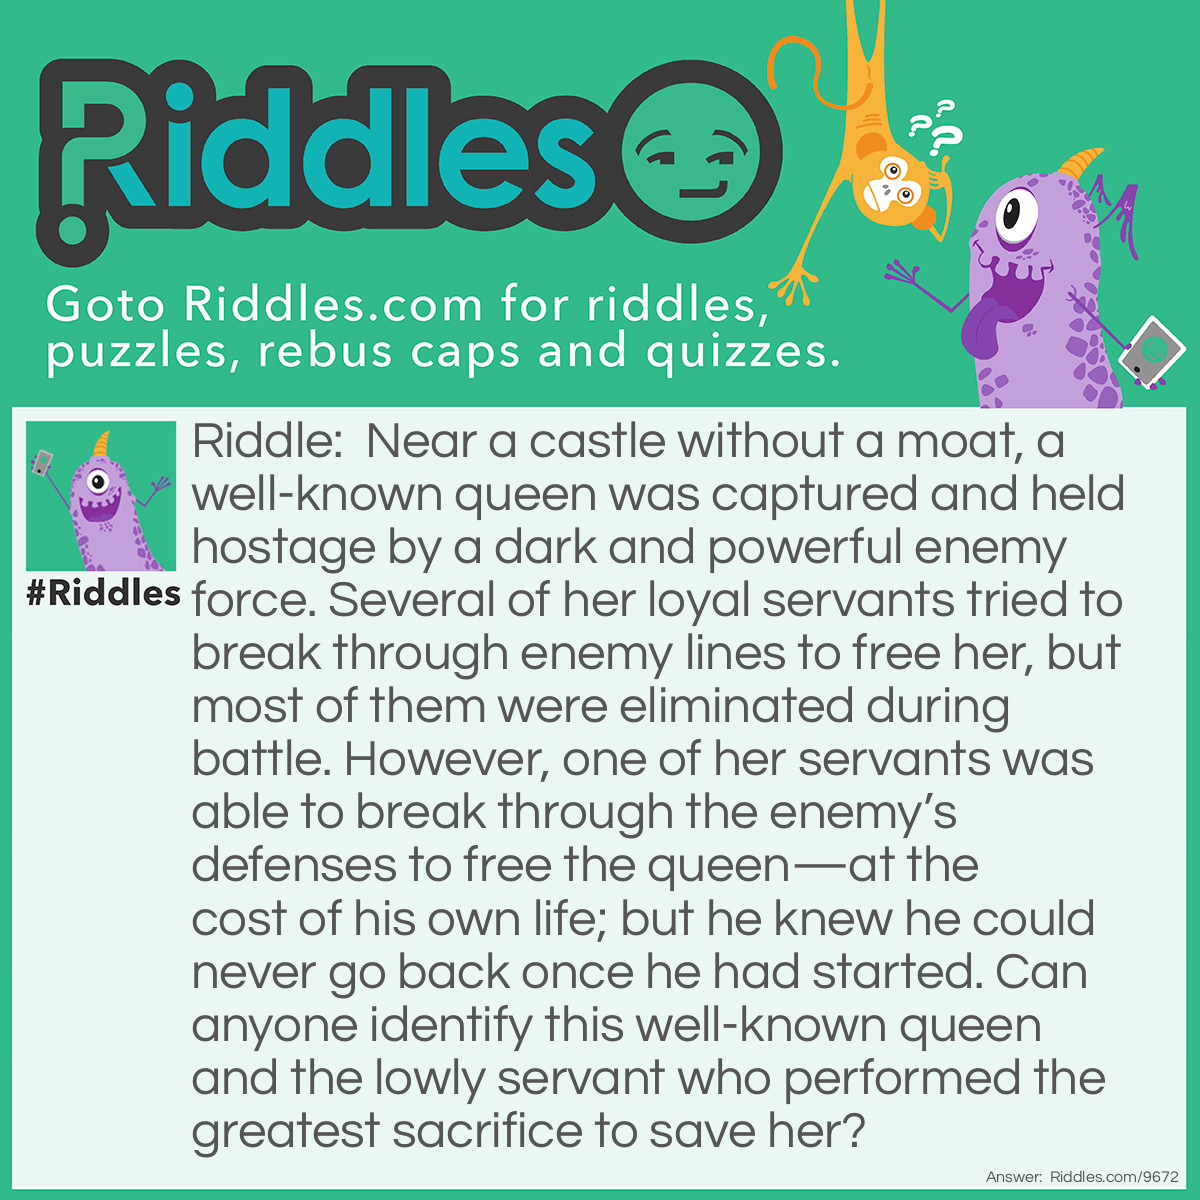 Riddle: Near a castle without a moat, a well-known queen was captured and held hostage by a dark and powerful enemy force. Several of her loyal servants tried to break through enemy lines to free her, but most of them were eliminated during battle. However, one of her servants was able to break through the enemy's defenses to free the queen-at the cost of his own life; but he knew he could never go back once he had started. Can anyone identify this well-known queen and the lowly servant who performed the greatest sacrifice to save her? Answer: The queen was the white queen, and the servant who was sacrificed was a white pawn who had reached the back row of the black chess pieces—and was subsequently promoted/exchanged for the captured white queen.